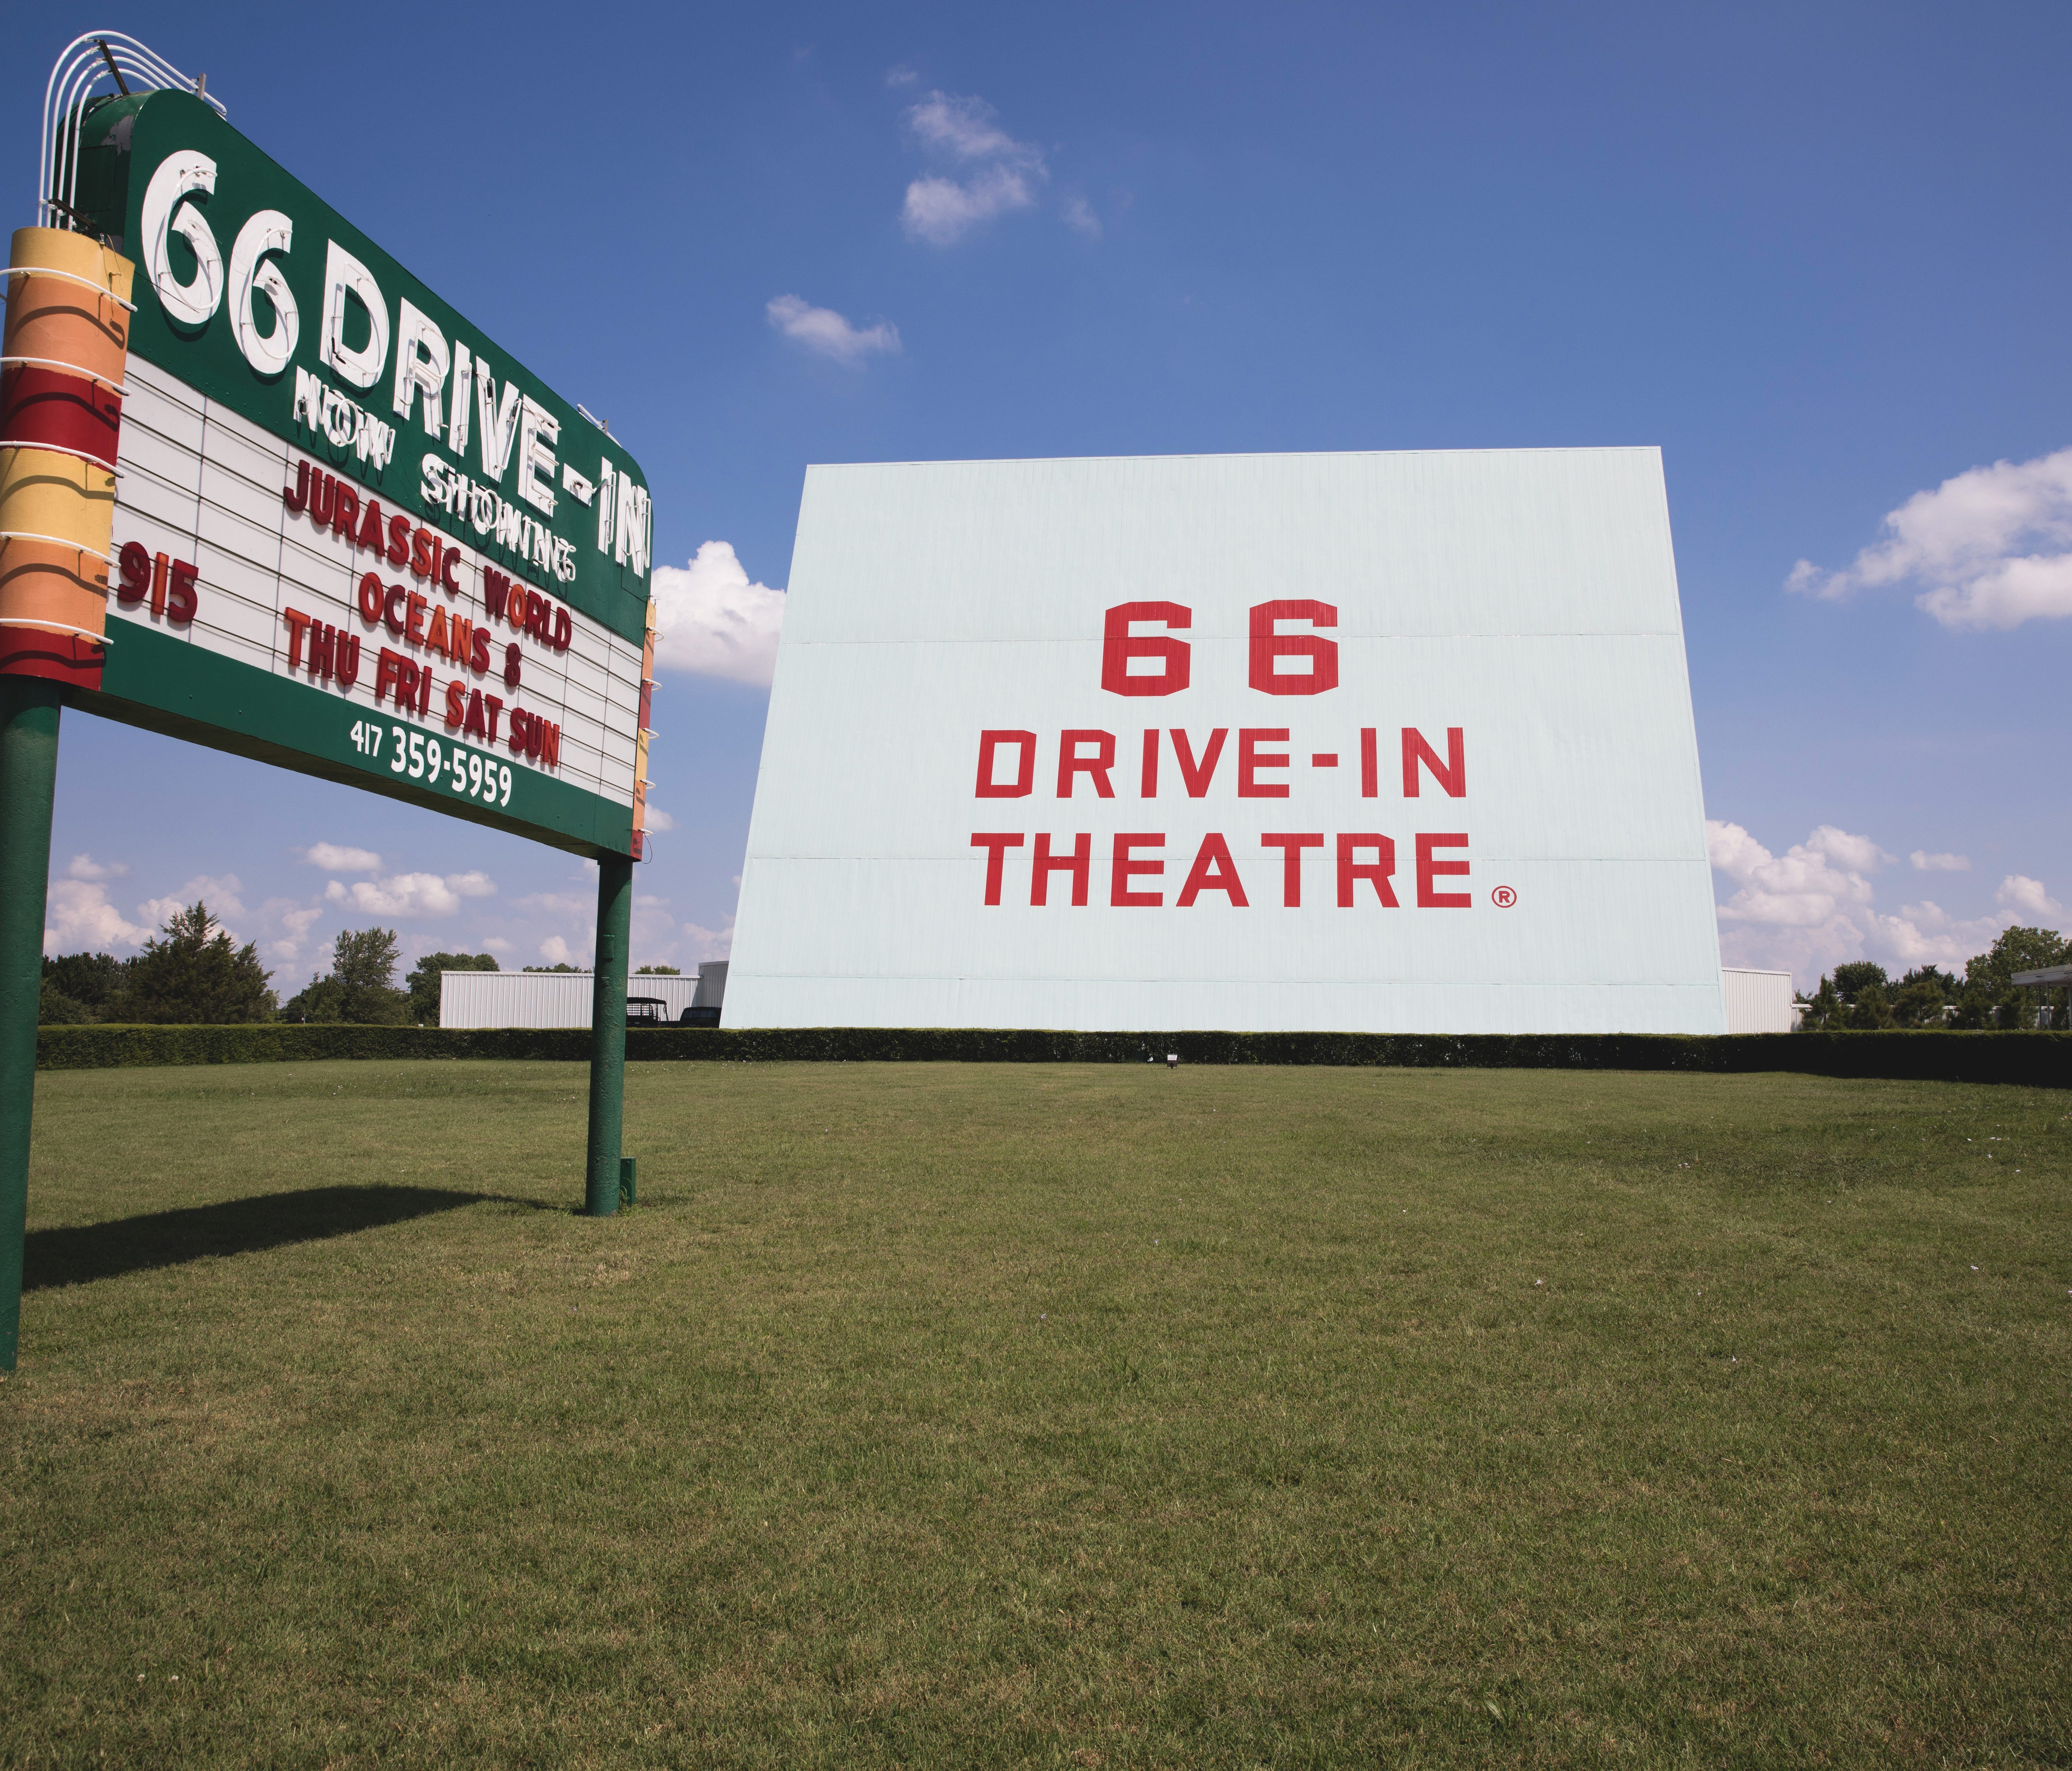 Located on a rural 9-acre plot almost 3 miles outside the town of Carthage is the 66 Drive-In Theatre. Drive-in theaters began as an innovation of the 1930s, but their iconic era of mass success did not begin until the lifting of wartime rationing an